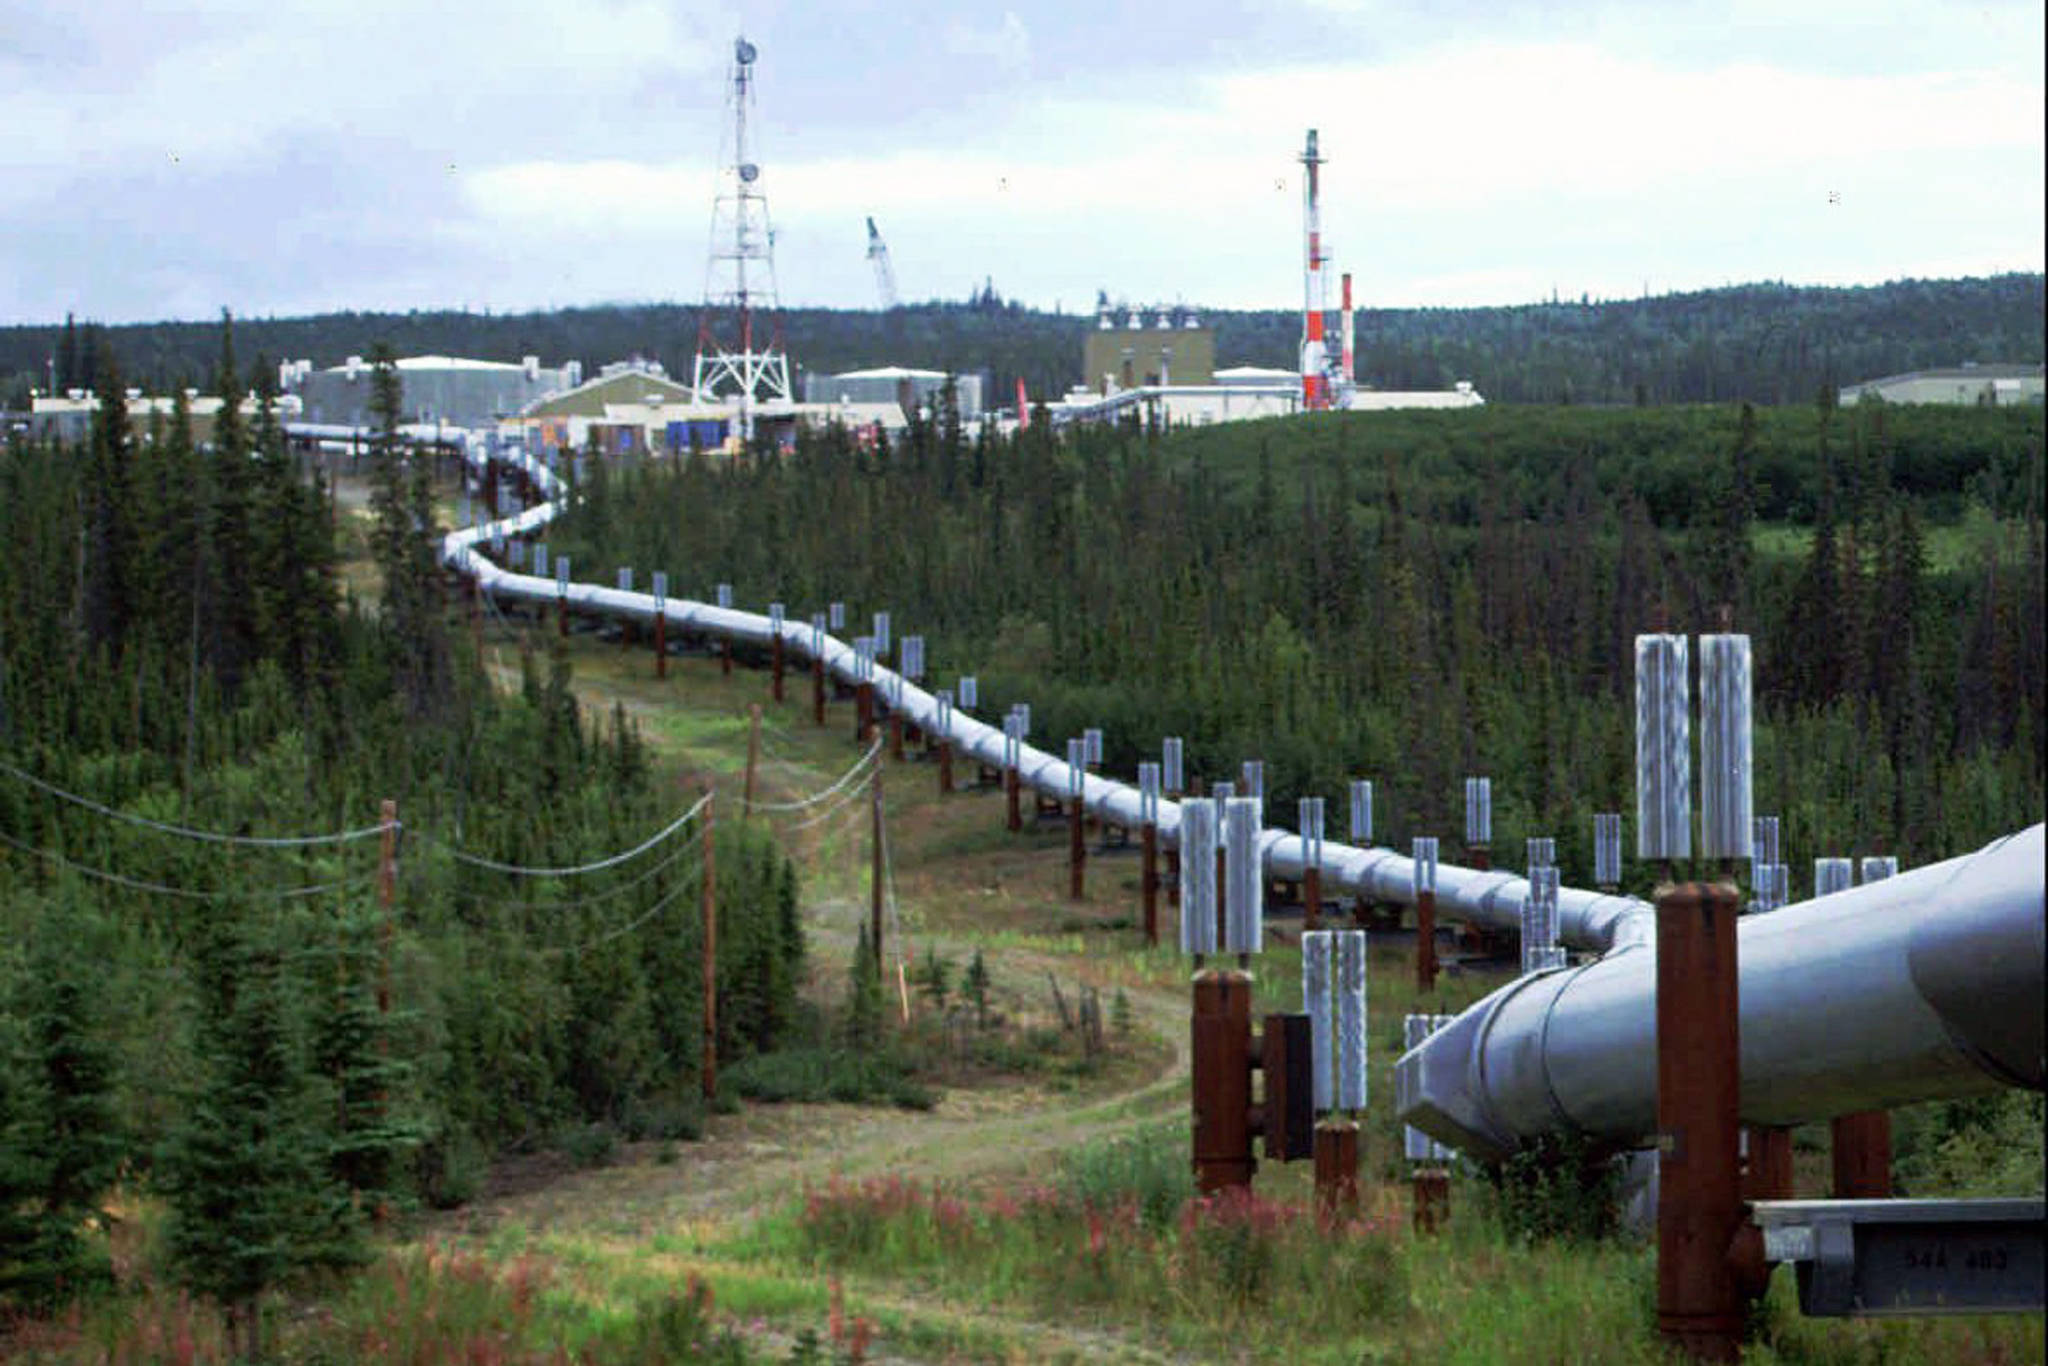 This undated file photo shows the Trans-Alaska pipeline and pump station north of Fairbanks. (AP Photo/Al Grillo, File)